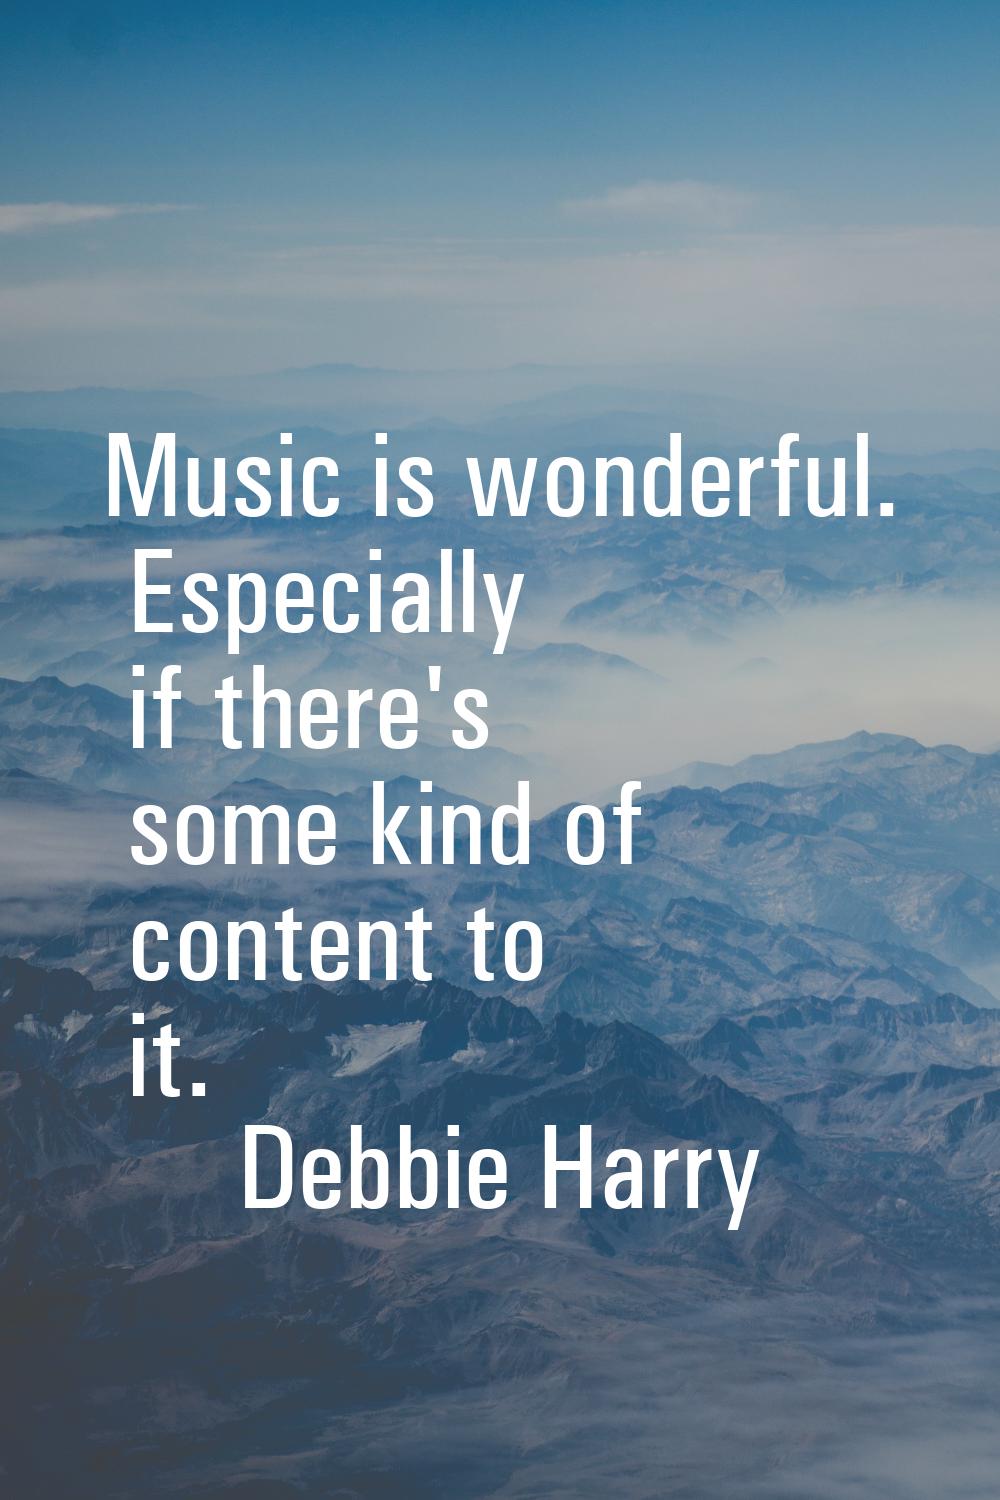 Music is wonderful. Especially if there's some kind of content to it.